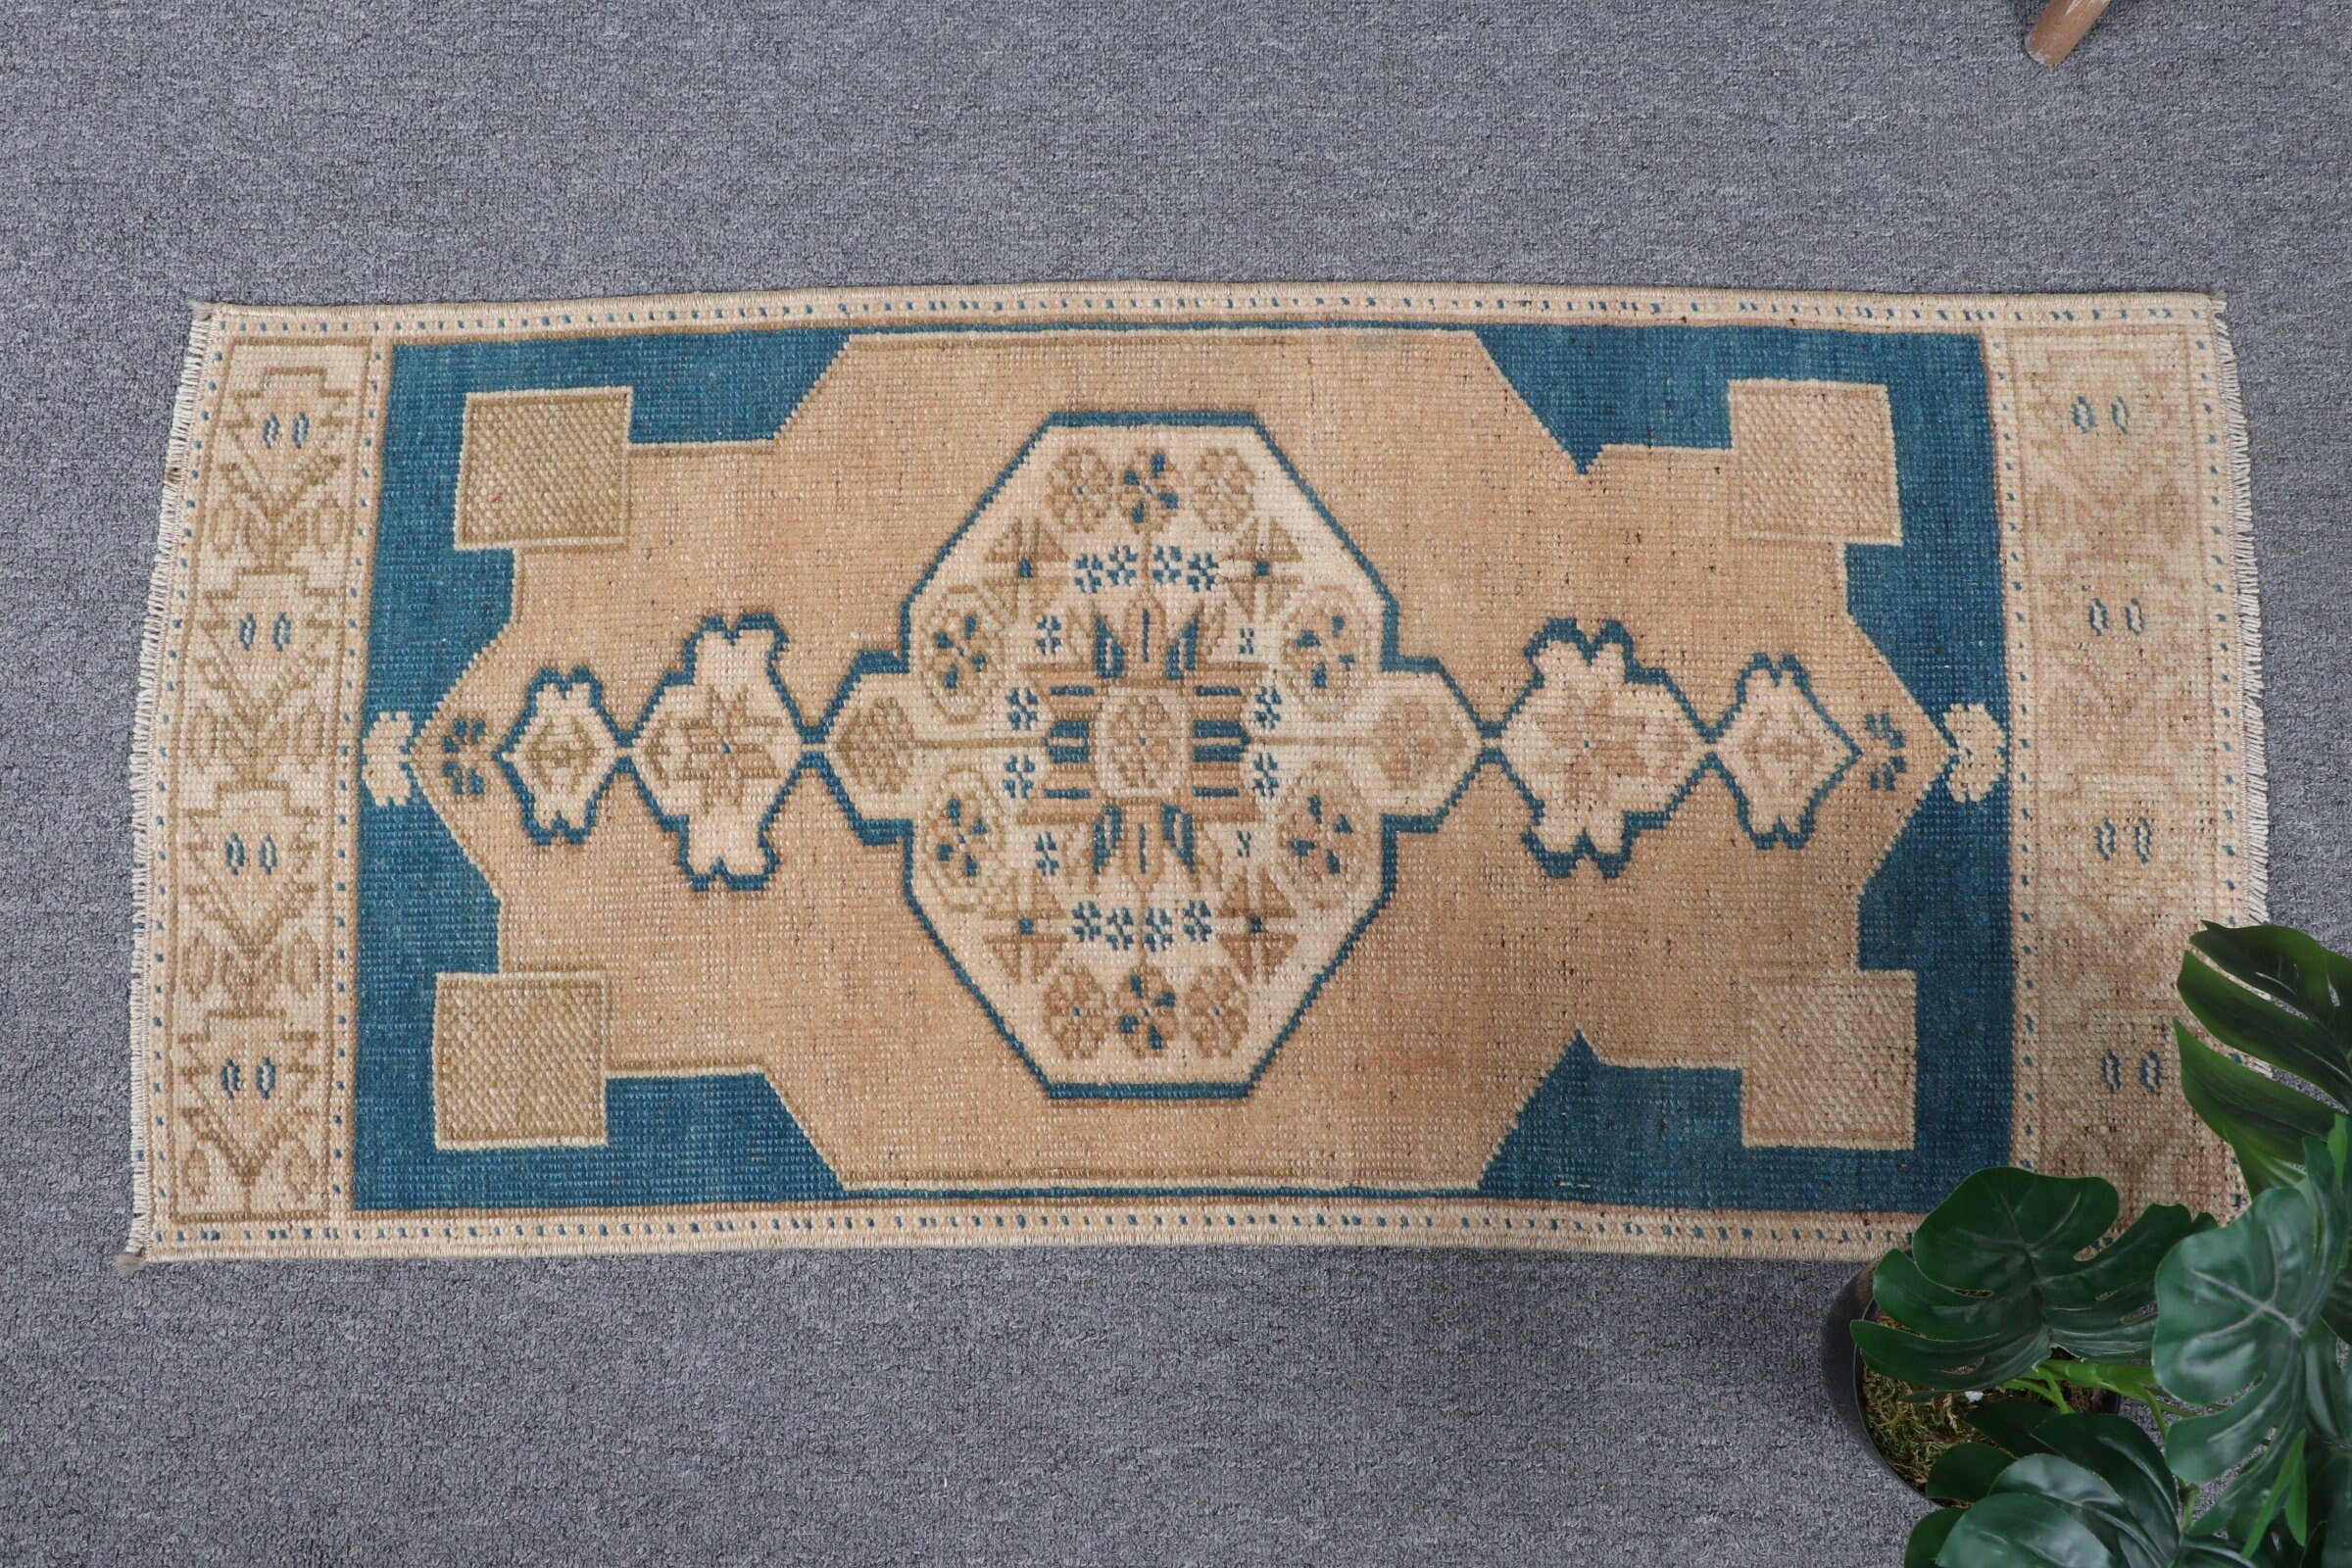 Rugs for Entry, Home Decor Rug, Brown Antique Rug, Car Mat Rug, 1.5x3.2 ft Small Rugs, Turkish Rugs, Vintage Rugs, Bath Rugs